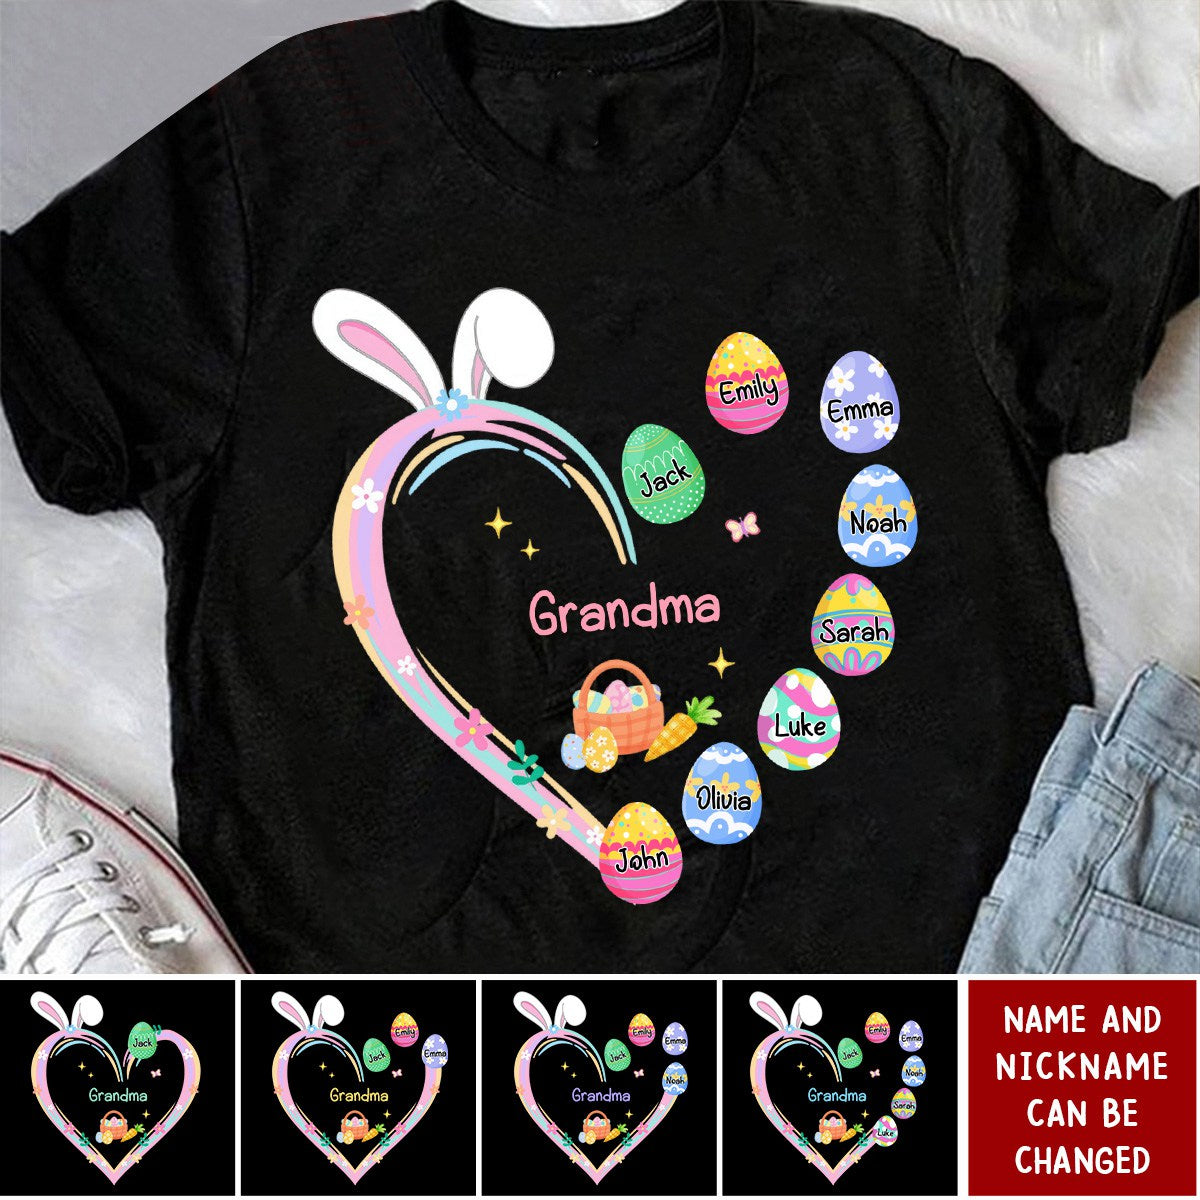 Grandma Easter Heart With Grandkids Bunny - Personalized T-Shirt - Easter, Birthday, Loving, Funny Gift for Grandma